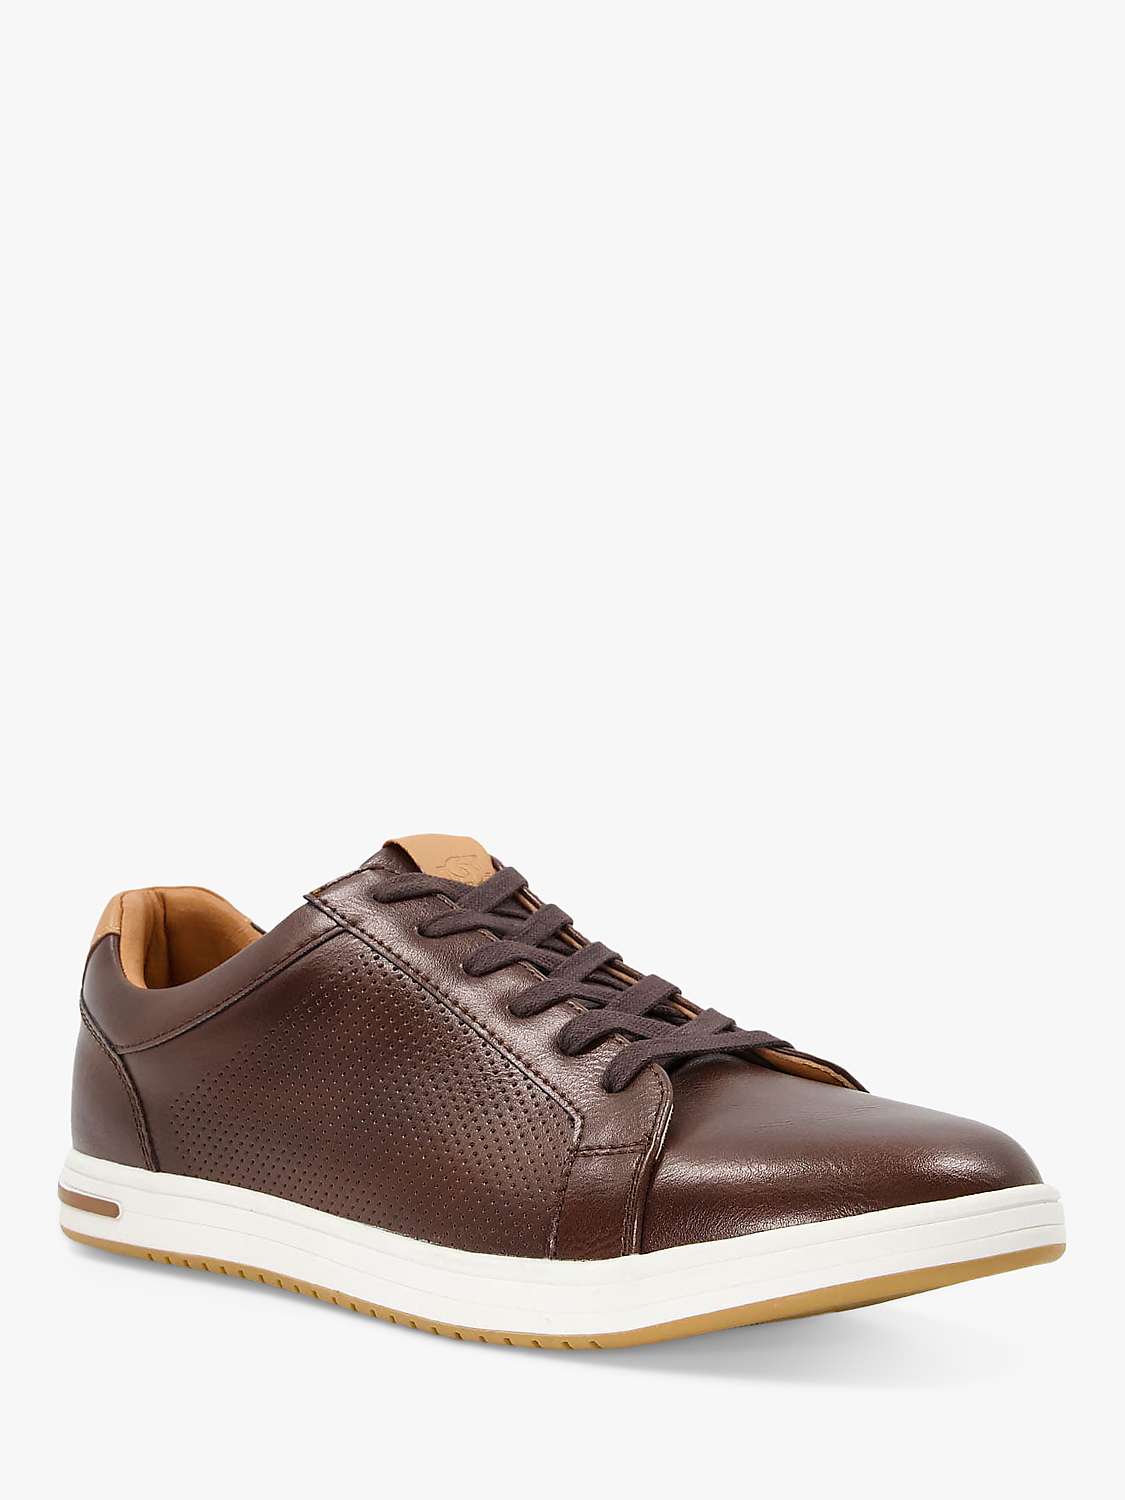 Buy Dune Tezzy Synthetic Shoes Online at johnlewis.com